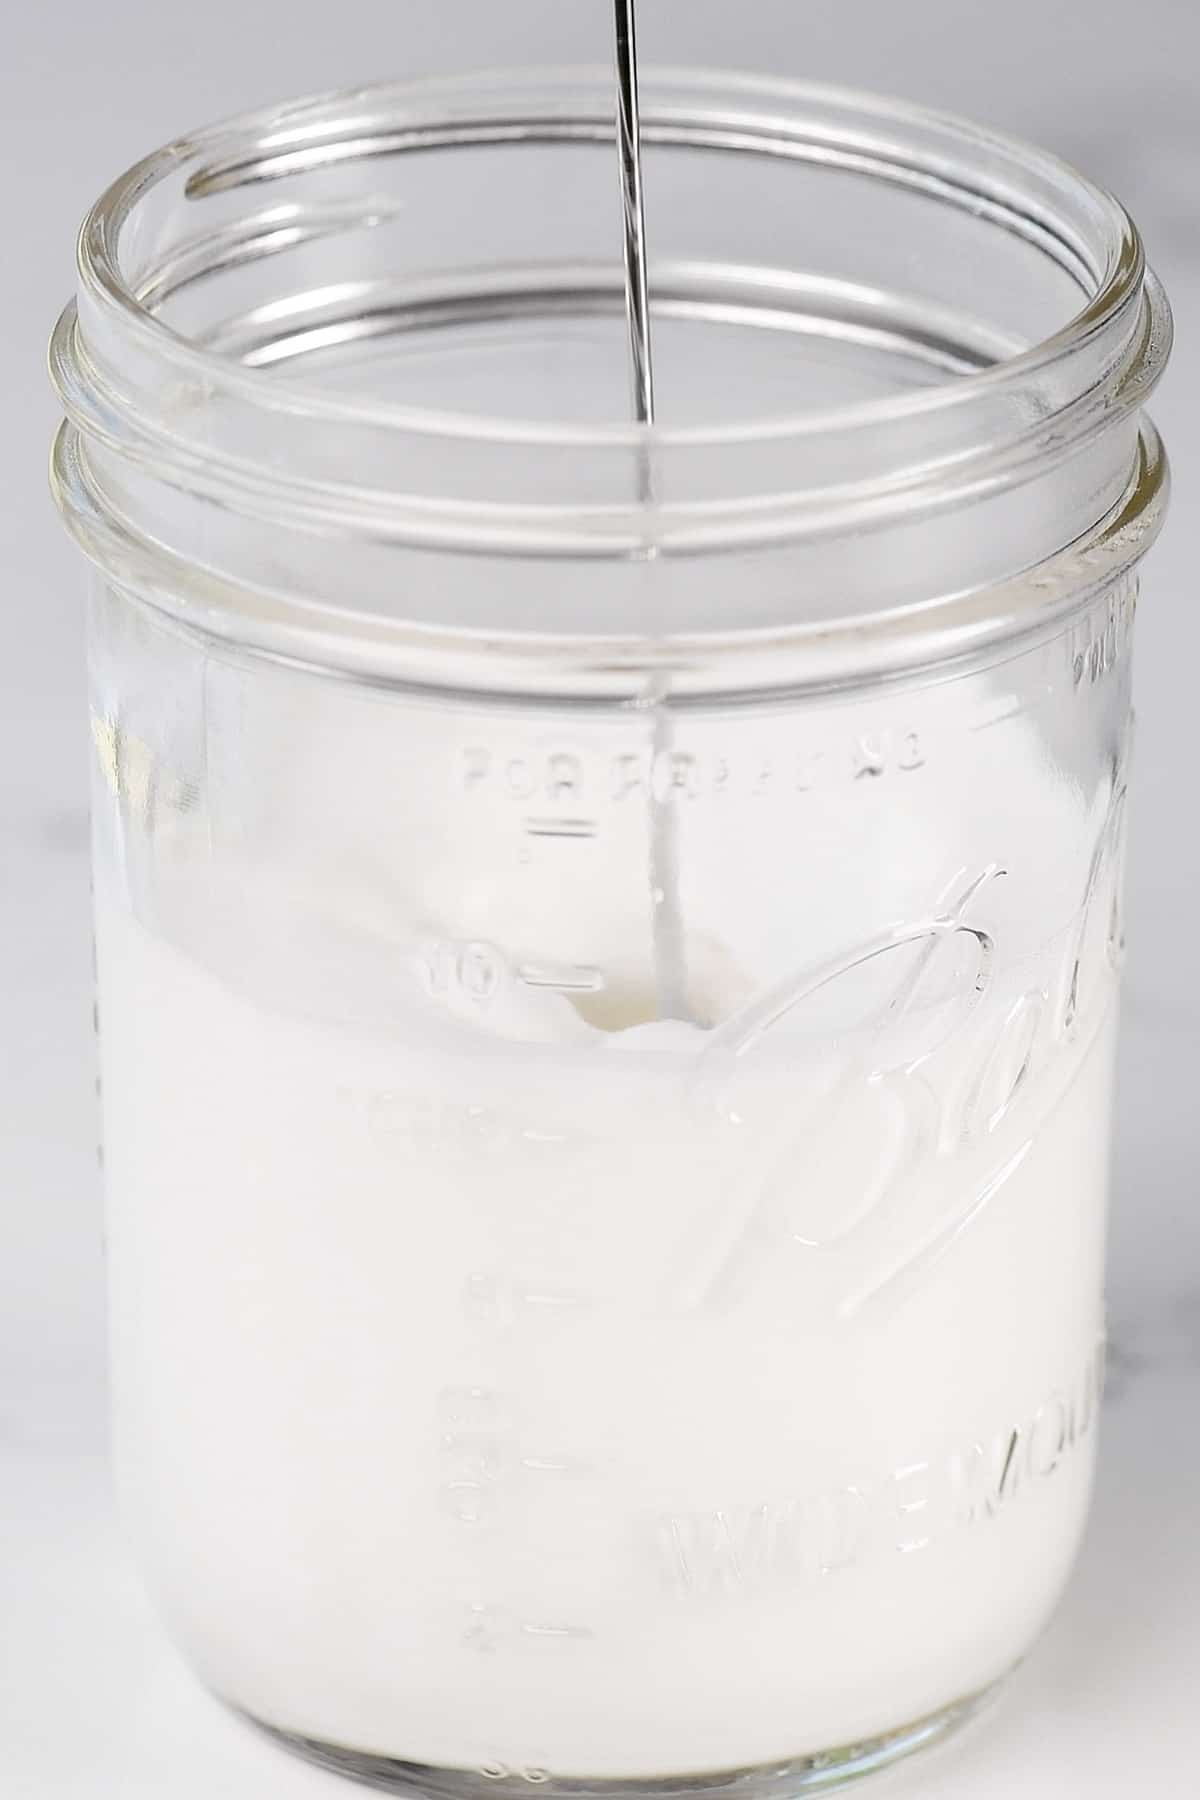 A frother making cold foam in a glass jar.